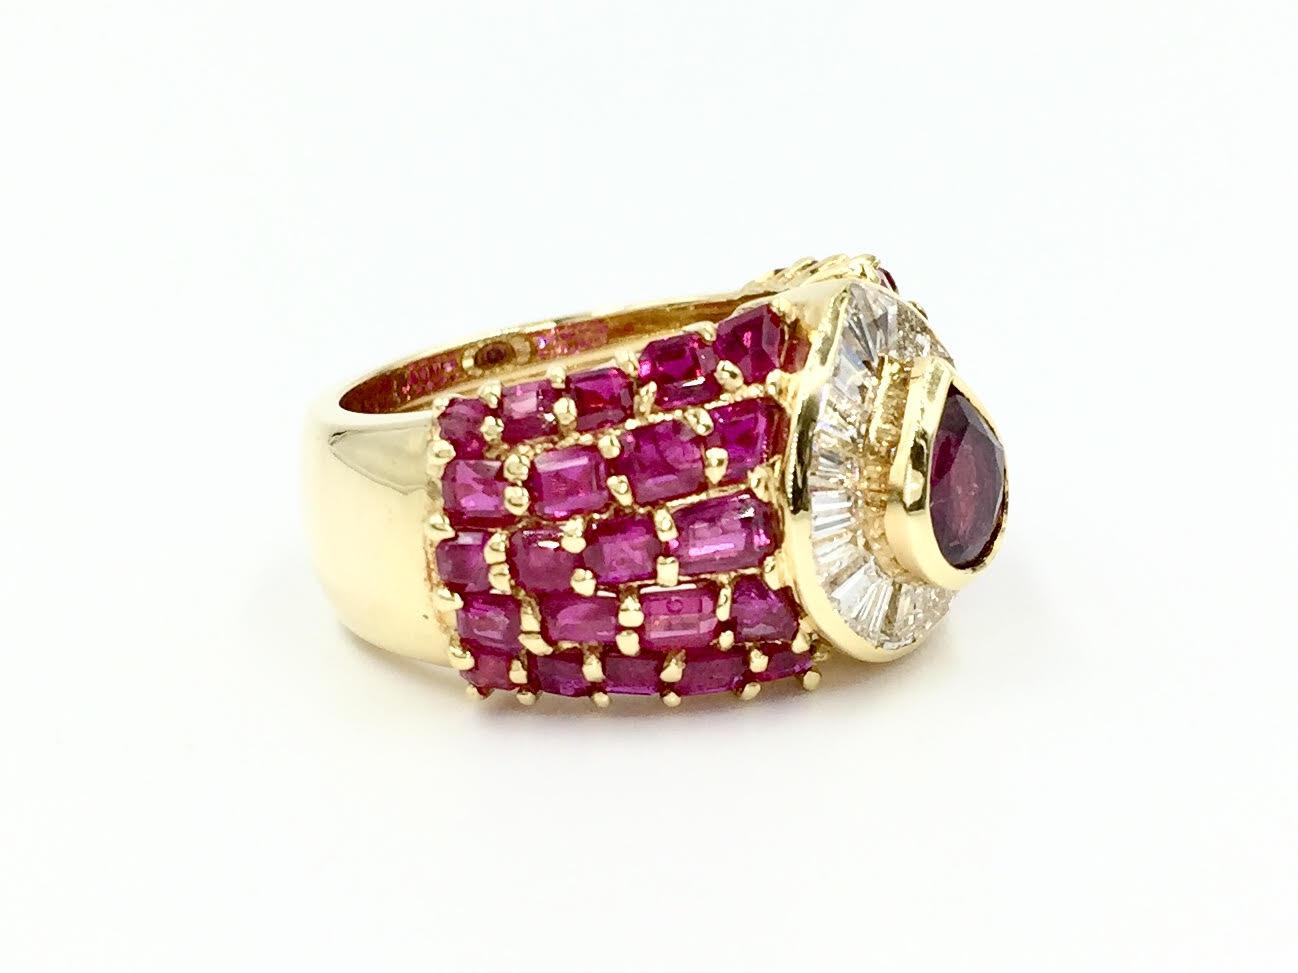 Fabulous and fun wide 18 karat yellow gold cocktail ring featuring 7.82 carats of gorgeous rubies with beautiful reddish-pink color and slightly transparent appearance. 0.94 carats of high quality baguette diamonds are perfectly set around a pear